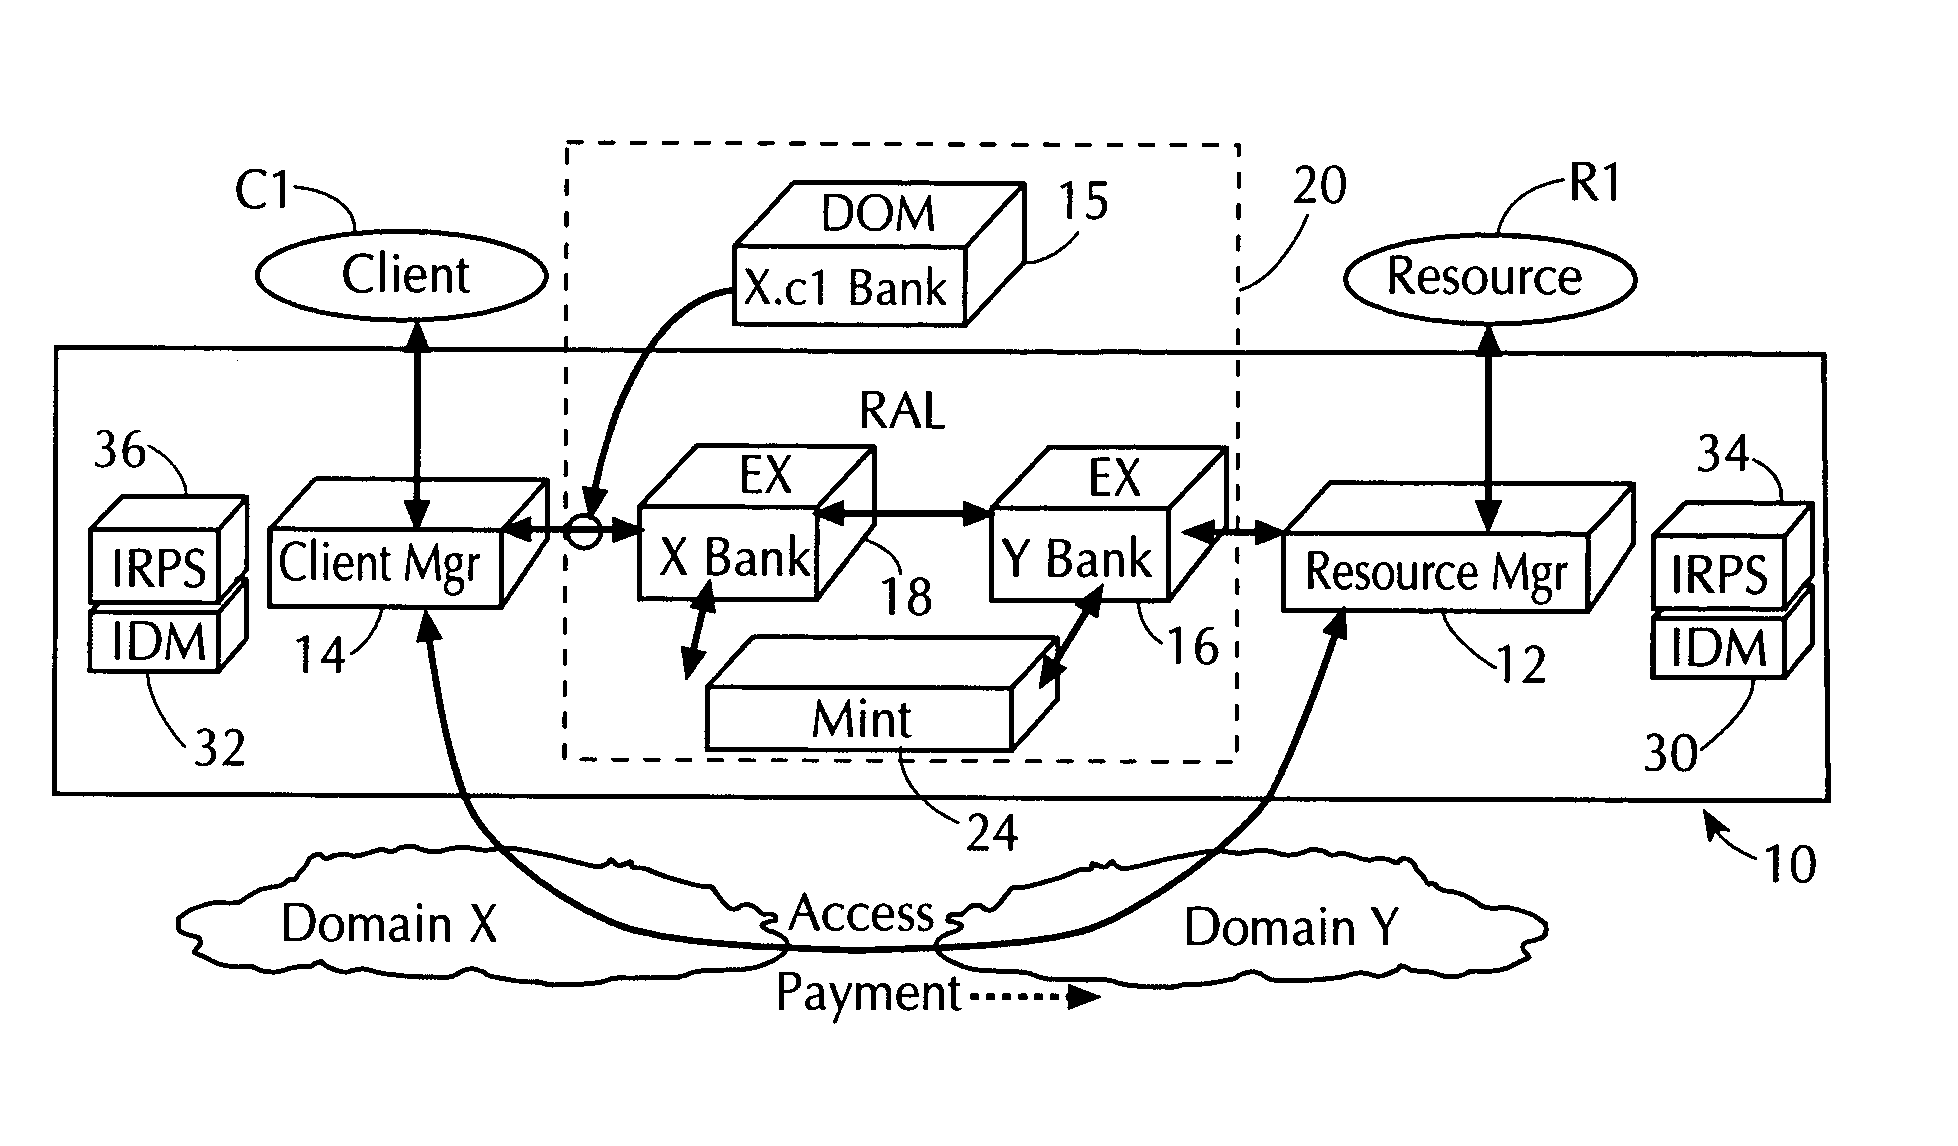 Using electronic security value units to control access to a resource